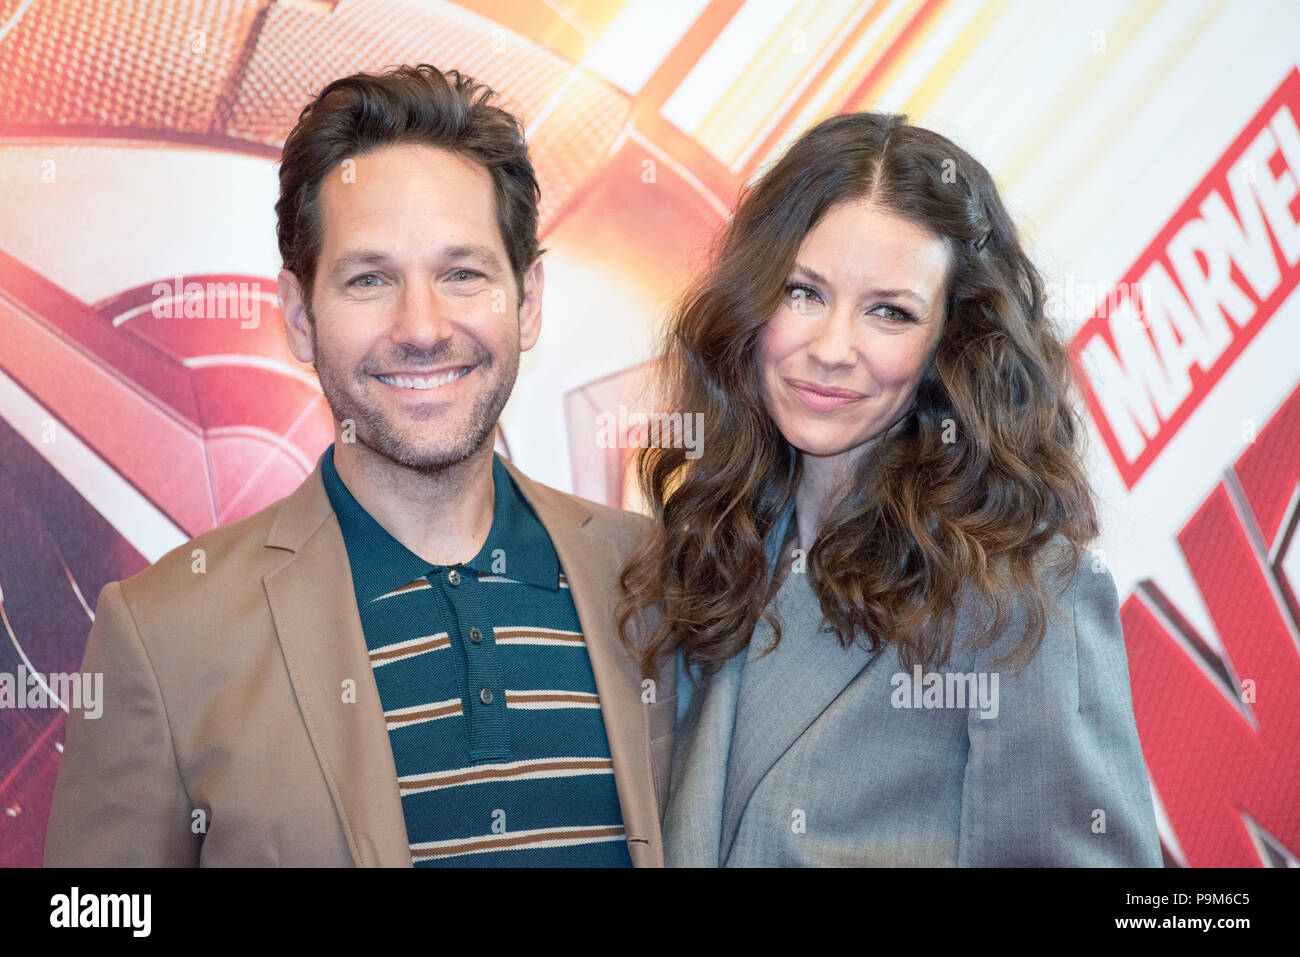 Rome, Italy. 19th July 2018. Rome, Italy. 19th July, 2018. Paul Rudd and Evangeline Lilly attending the photocall of Ant-Man and the Wasp at Hotel De Russie in Rome Credit: Silvia Gerbino/Alamy Live News Credit: Silvia Gerbino/Alamy Live News Stock Photo